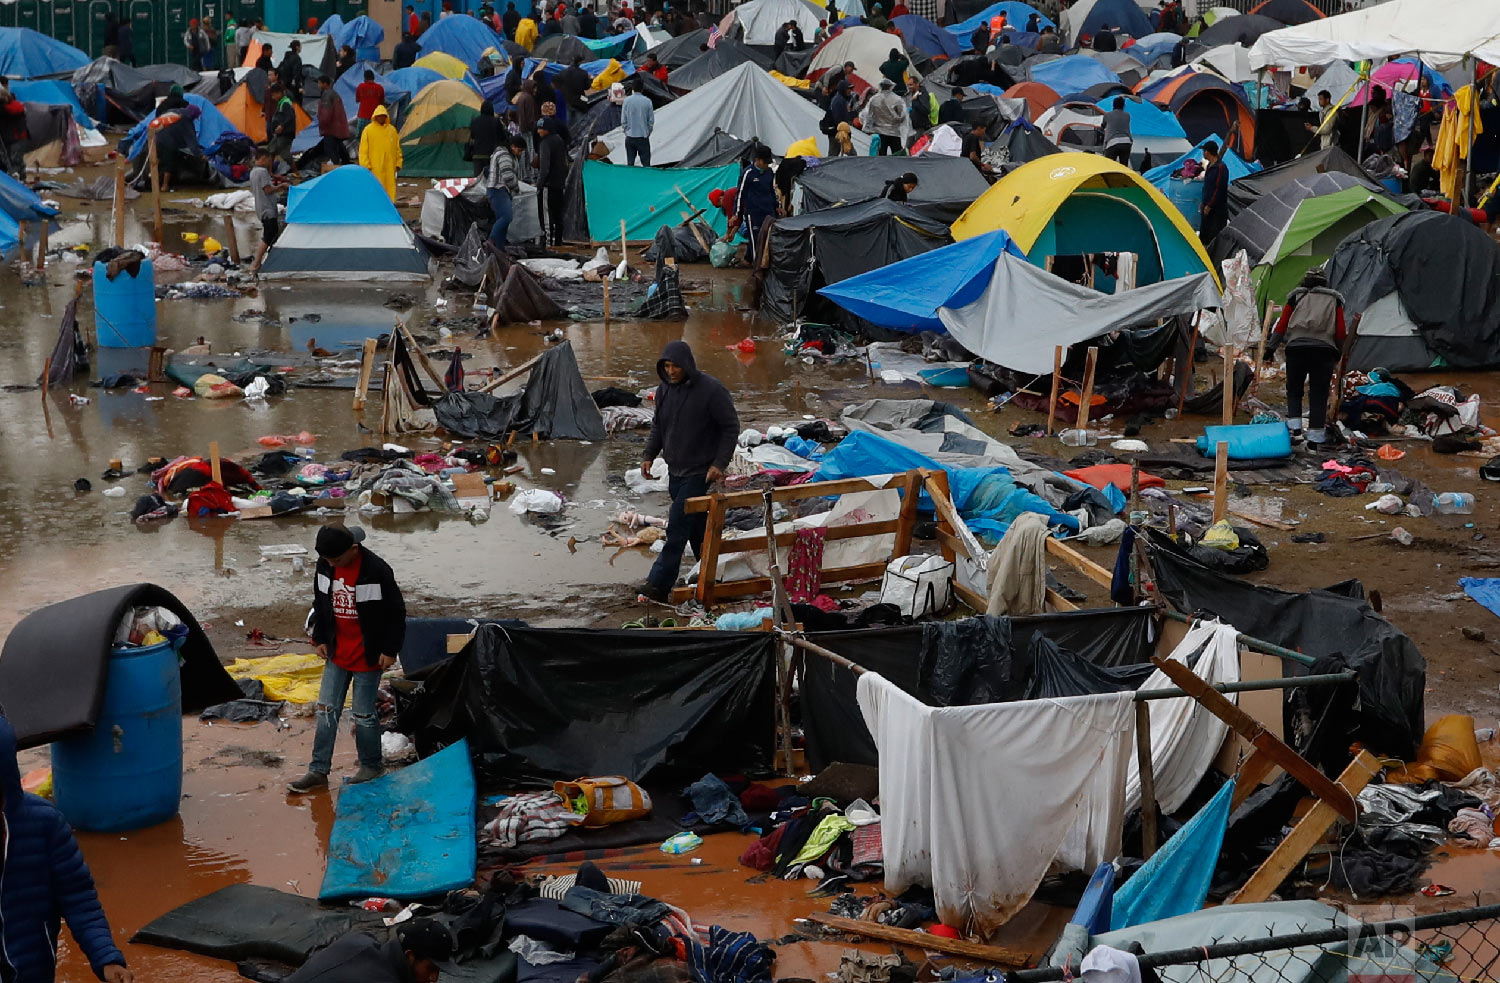  Migrants walk amidst flooded tents after heavy rains poured down on a sports complex sheltering thousands of Central Americans in Tijuana, Mexico, on Nov. 29, 2018. (AP Photo/Rebecca Blackwell) 